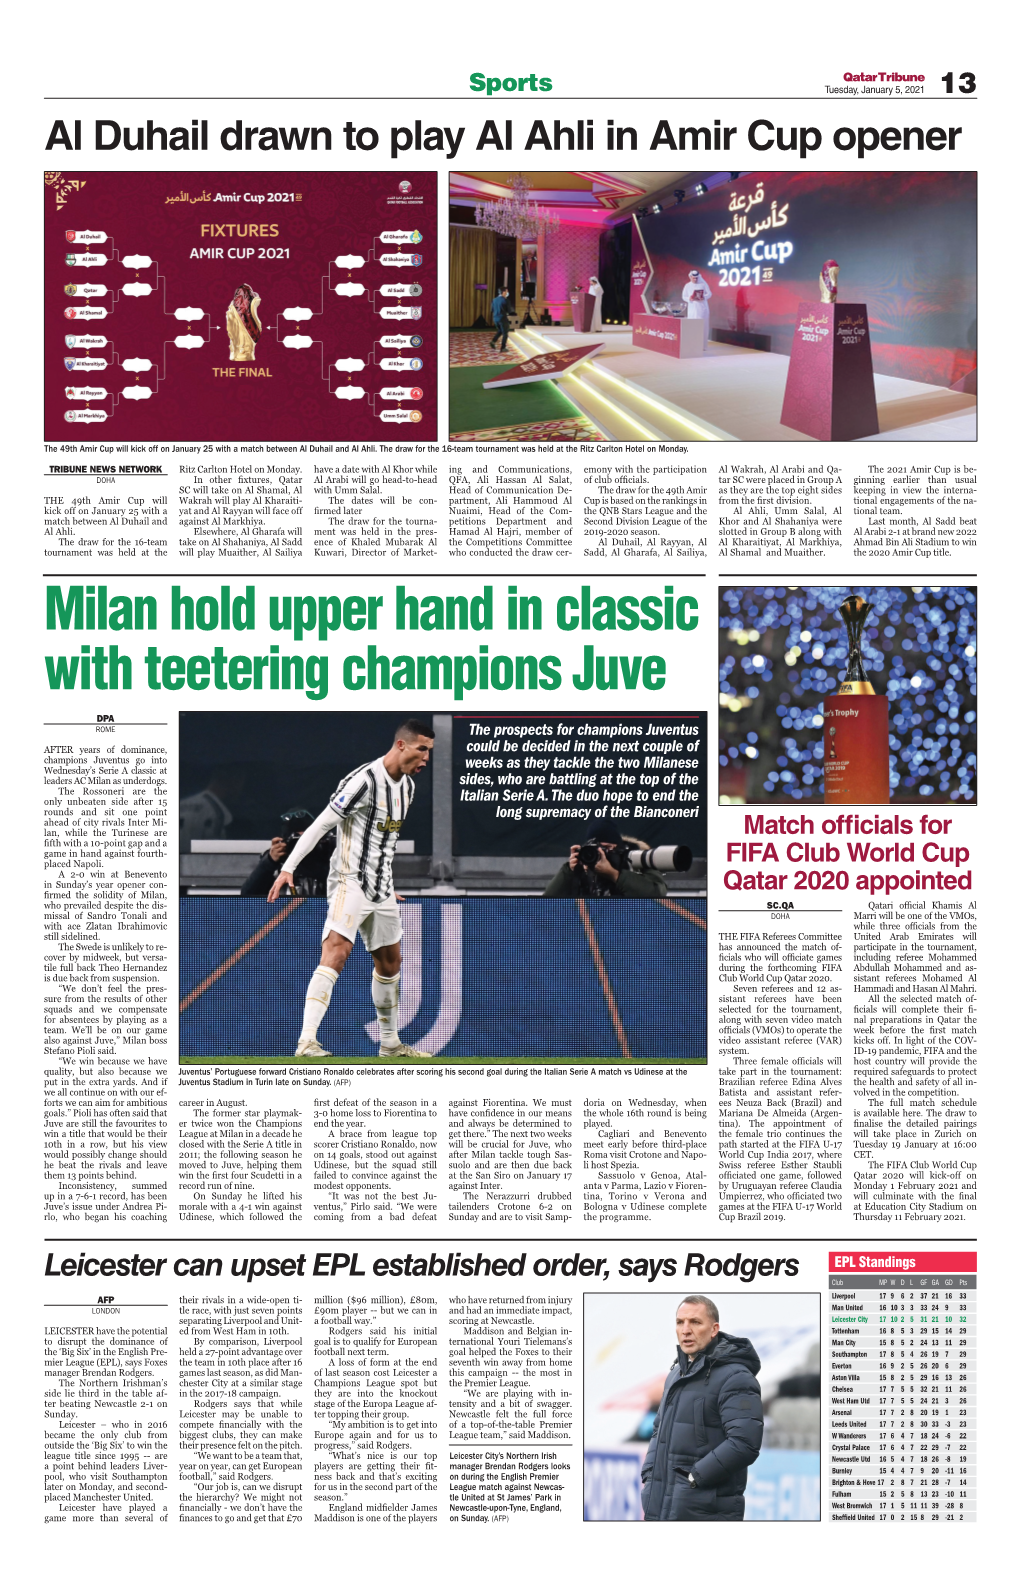 Milan Hold Upper Hand in Classic with Teetering Champions Juve